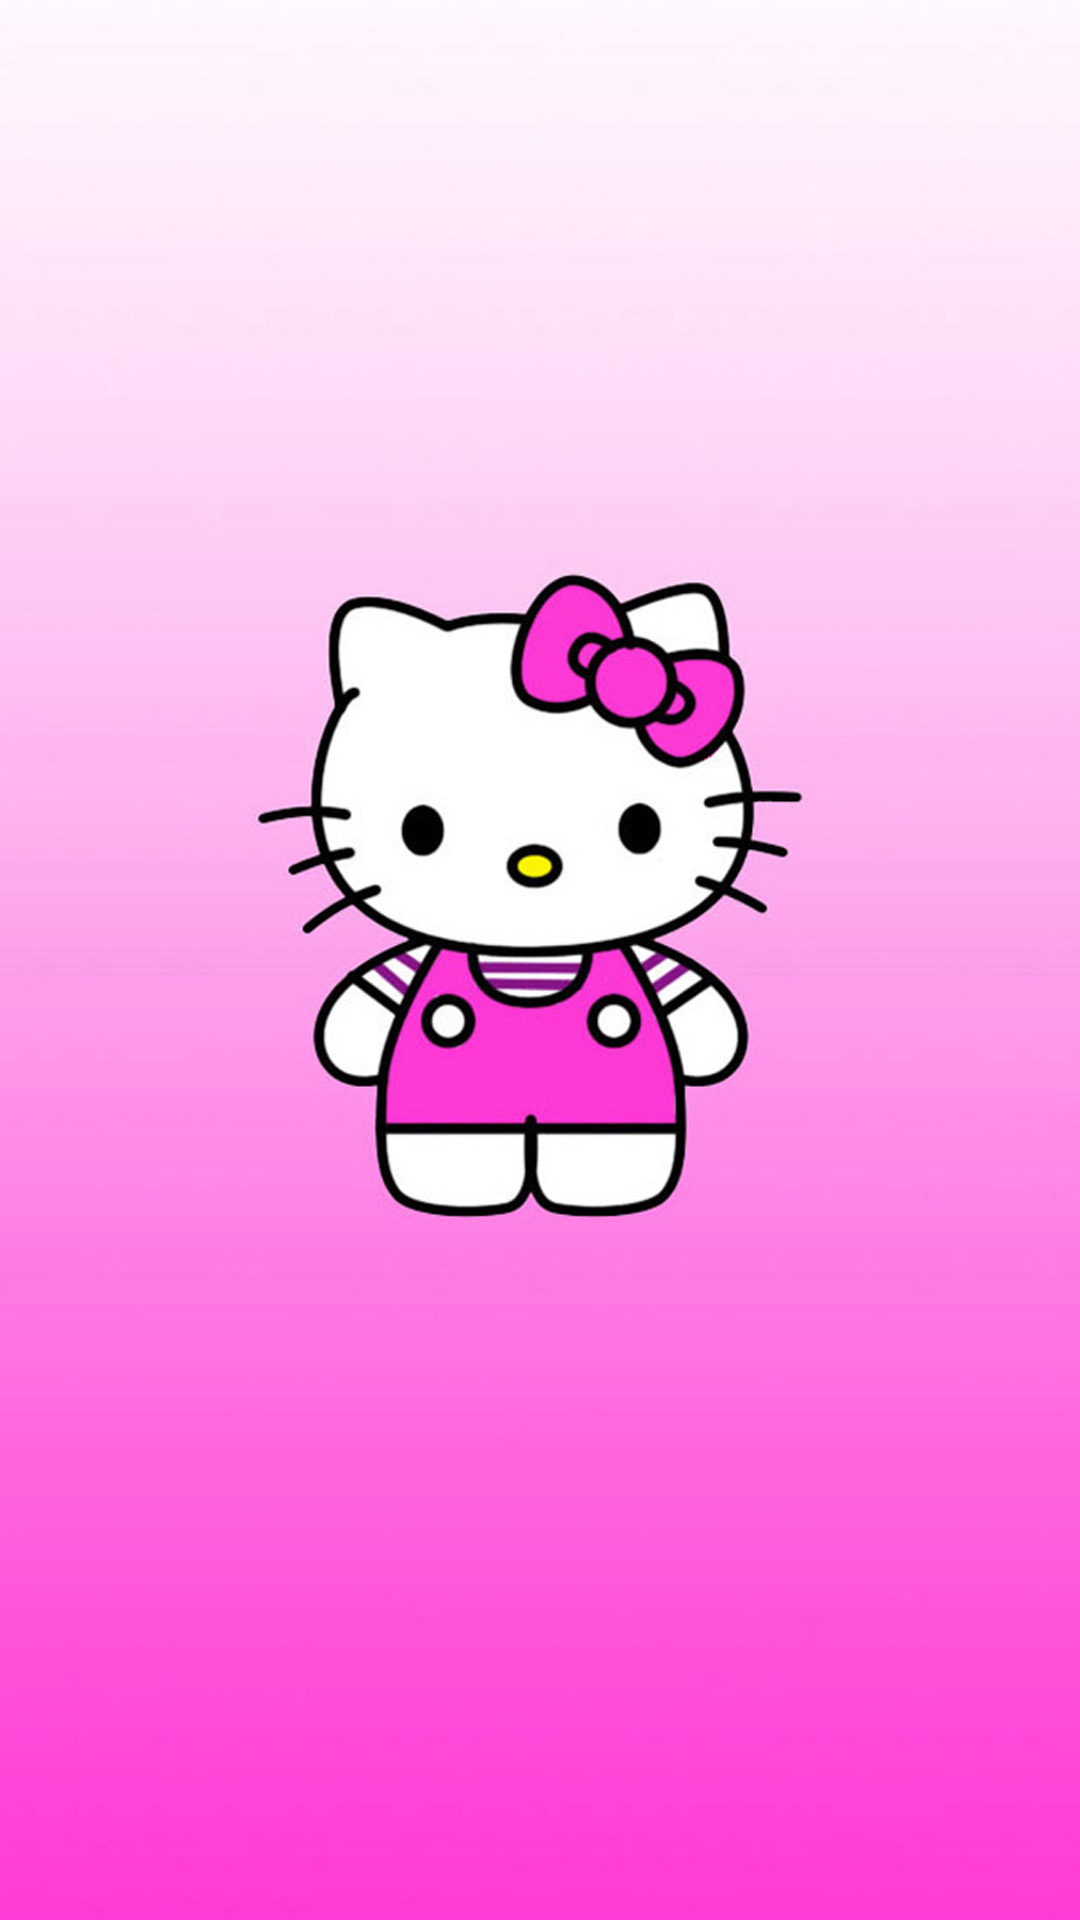 Cute Hello Kitty Wallpaper iPhone 6 Plus Wallpapers HD